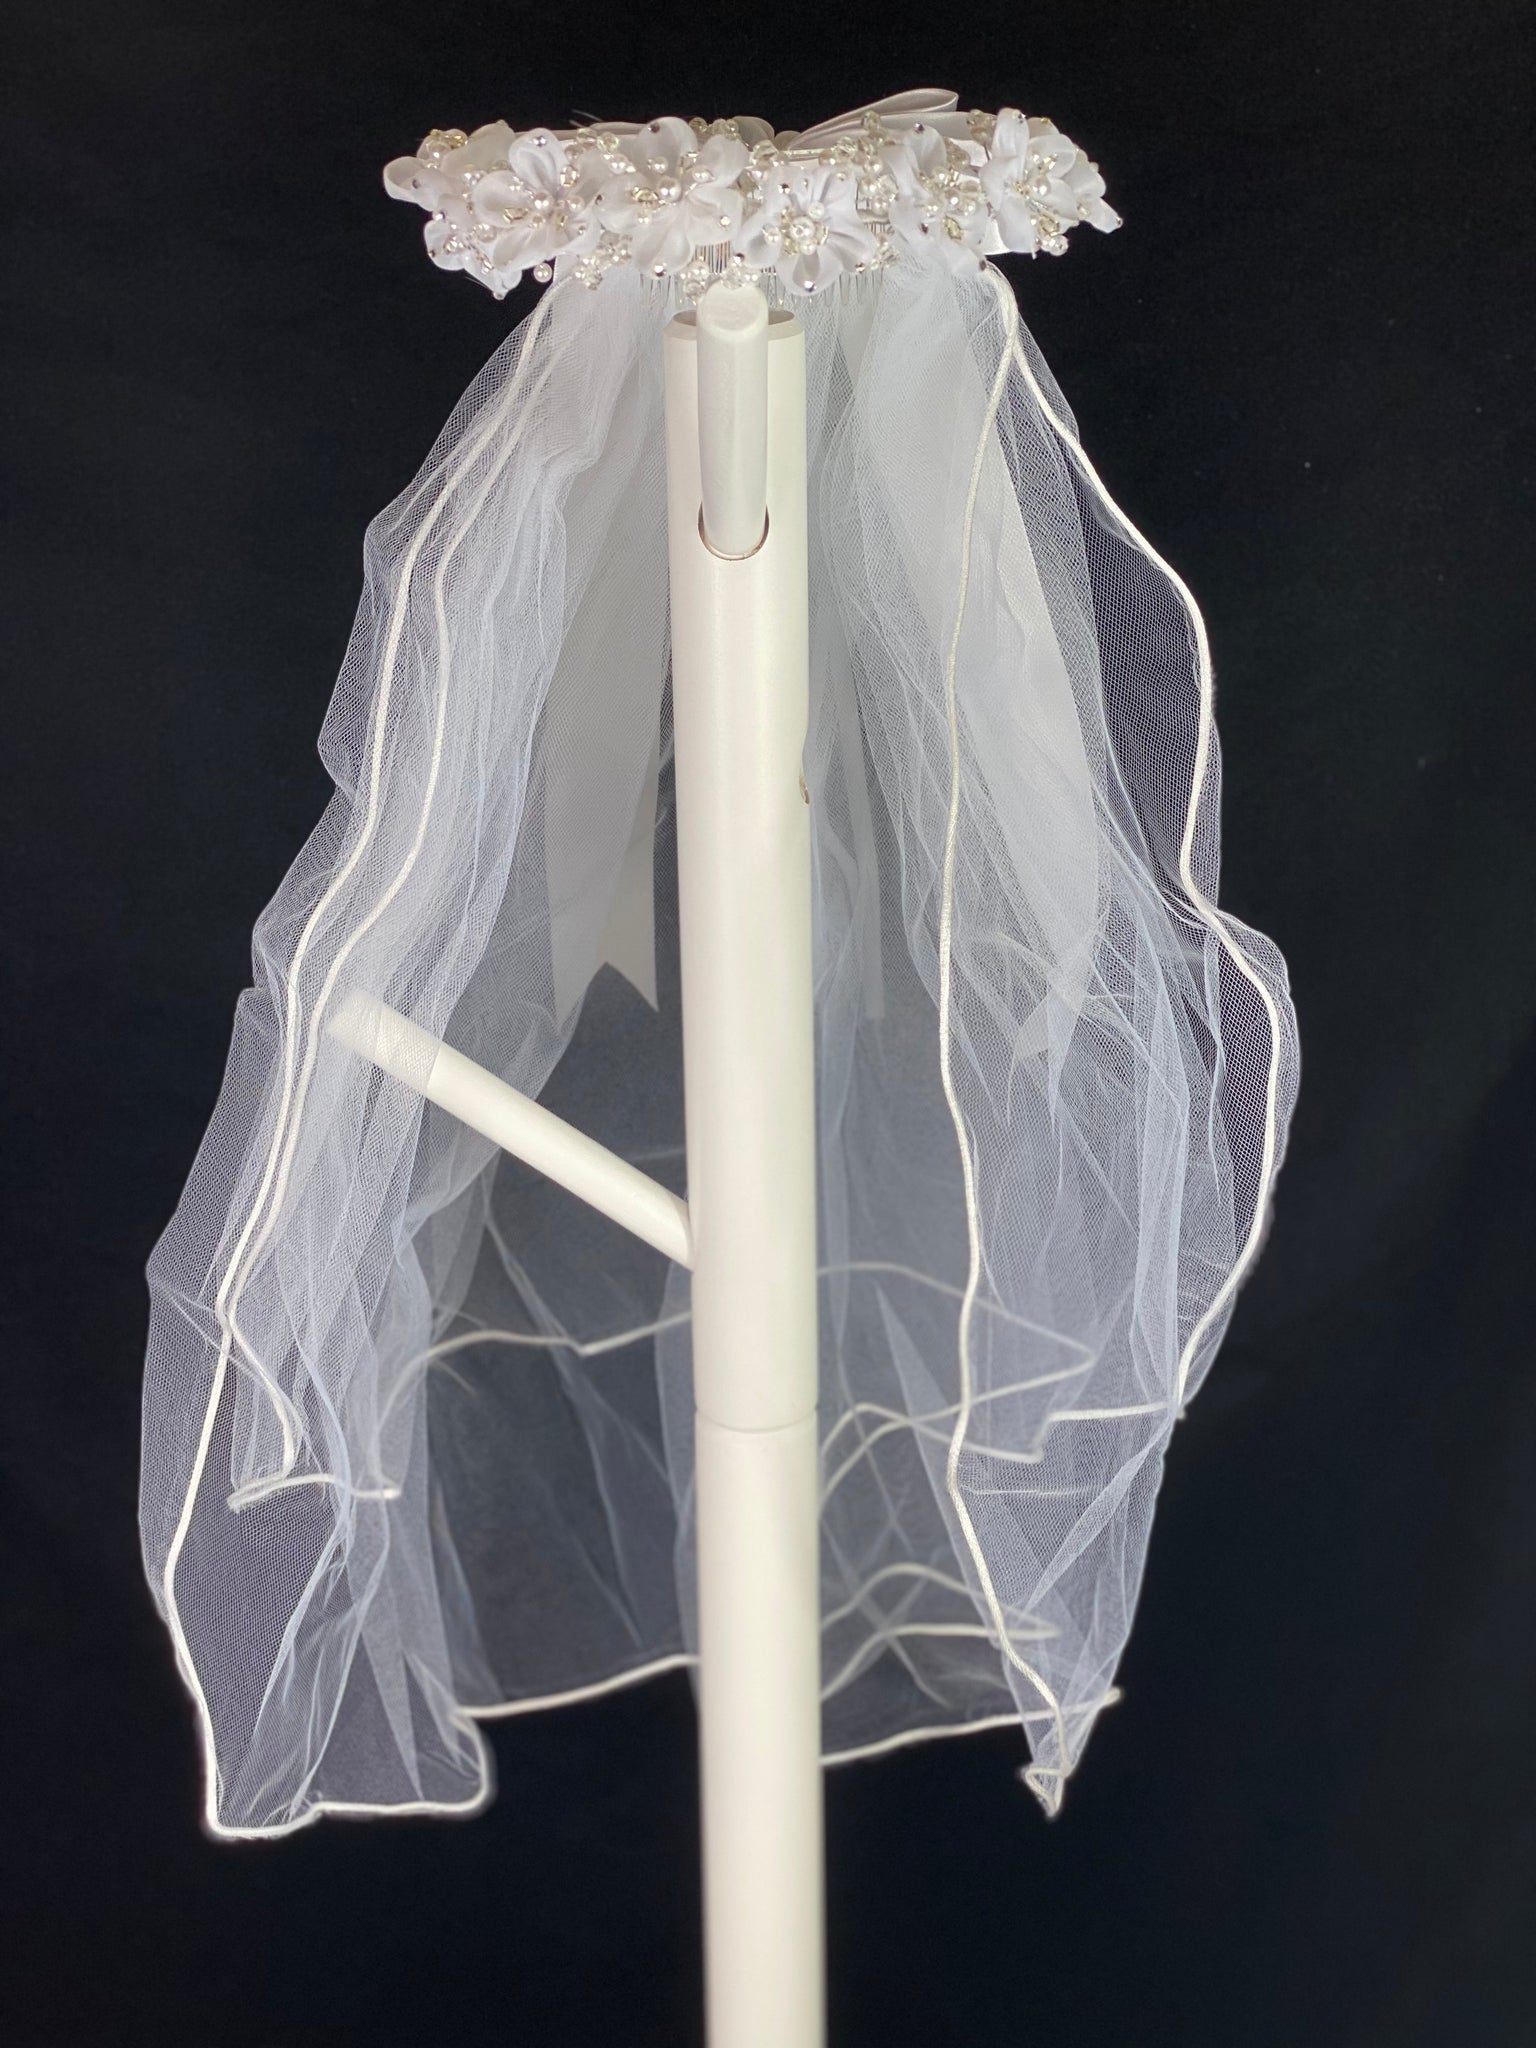 Elegant soft 2 layer tulle veil with delicate hand stitched braided satin trim around the edge and  Handmade flower halo crown with veil with large white satin bow on back. Organza flowers with sparkling rhinestone petals and pearl centers. Beautiful pearl leaves sticking out around flowers. This double layered veil reaches approximately 24" long, with a crown diameter of 6". Veil has 2" long, 3" wide, comb to secure it in place. 